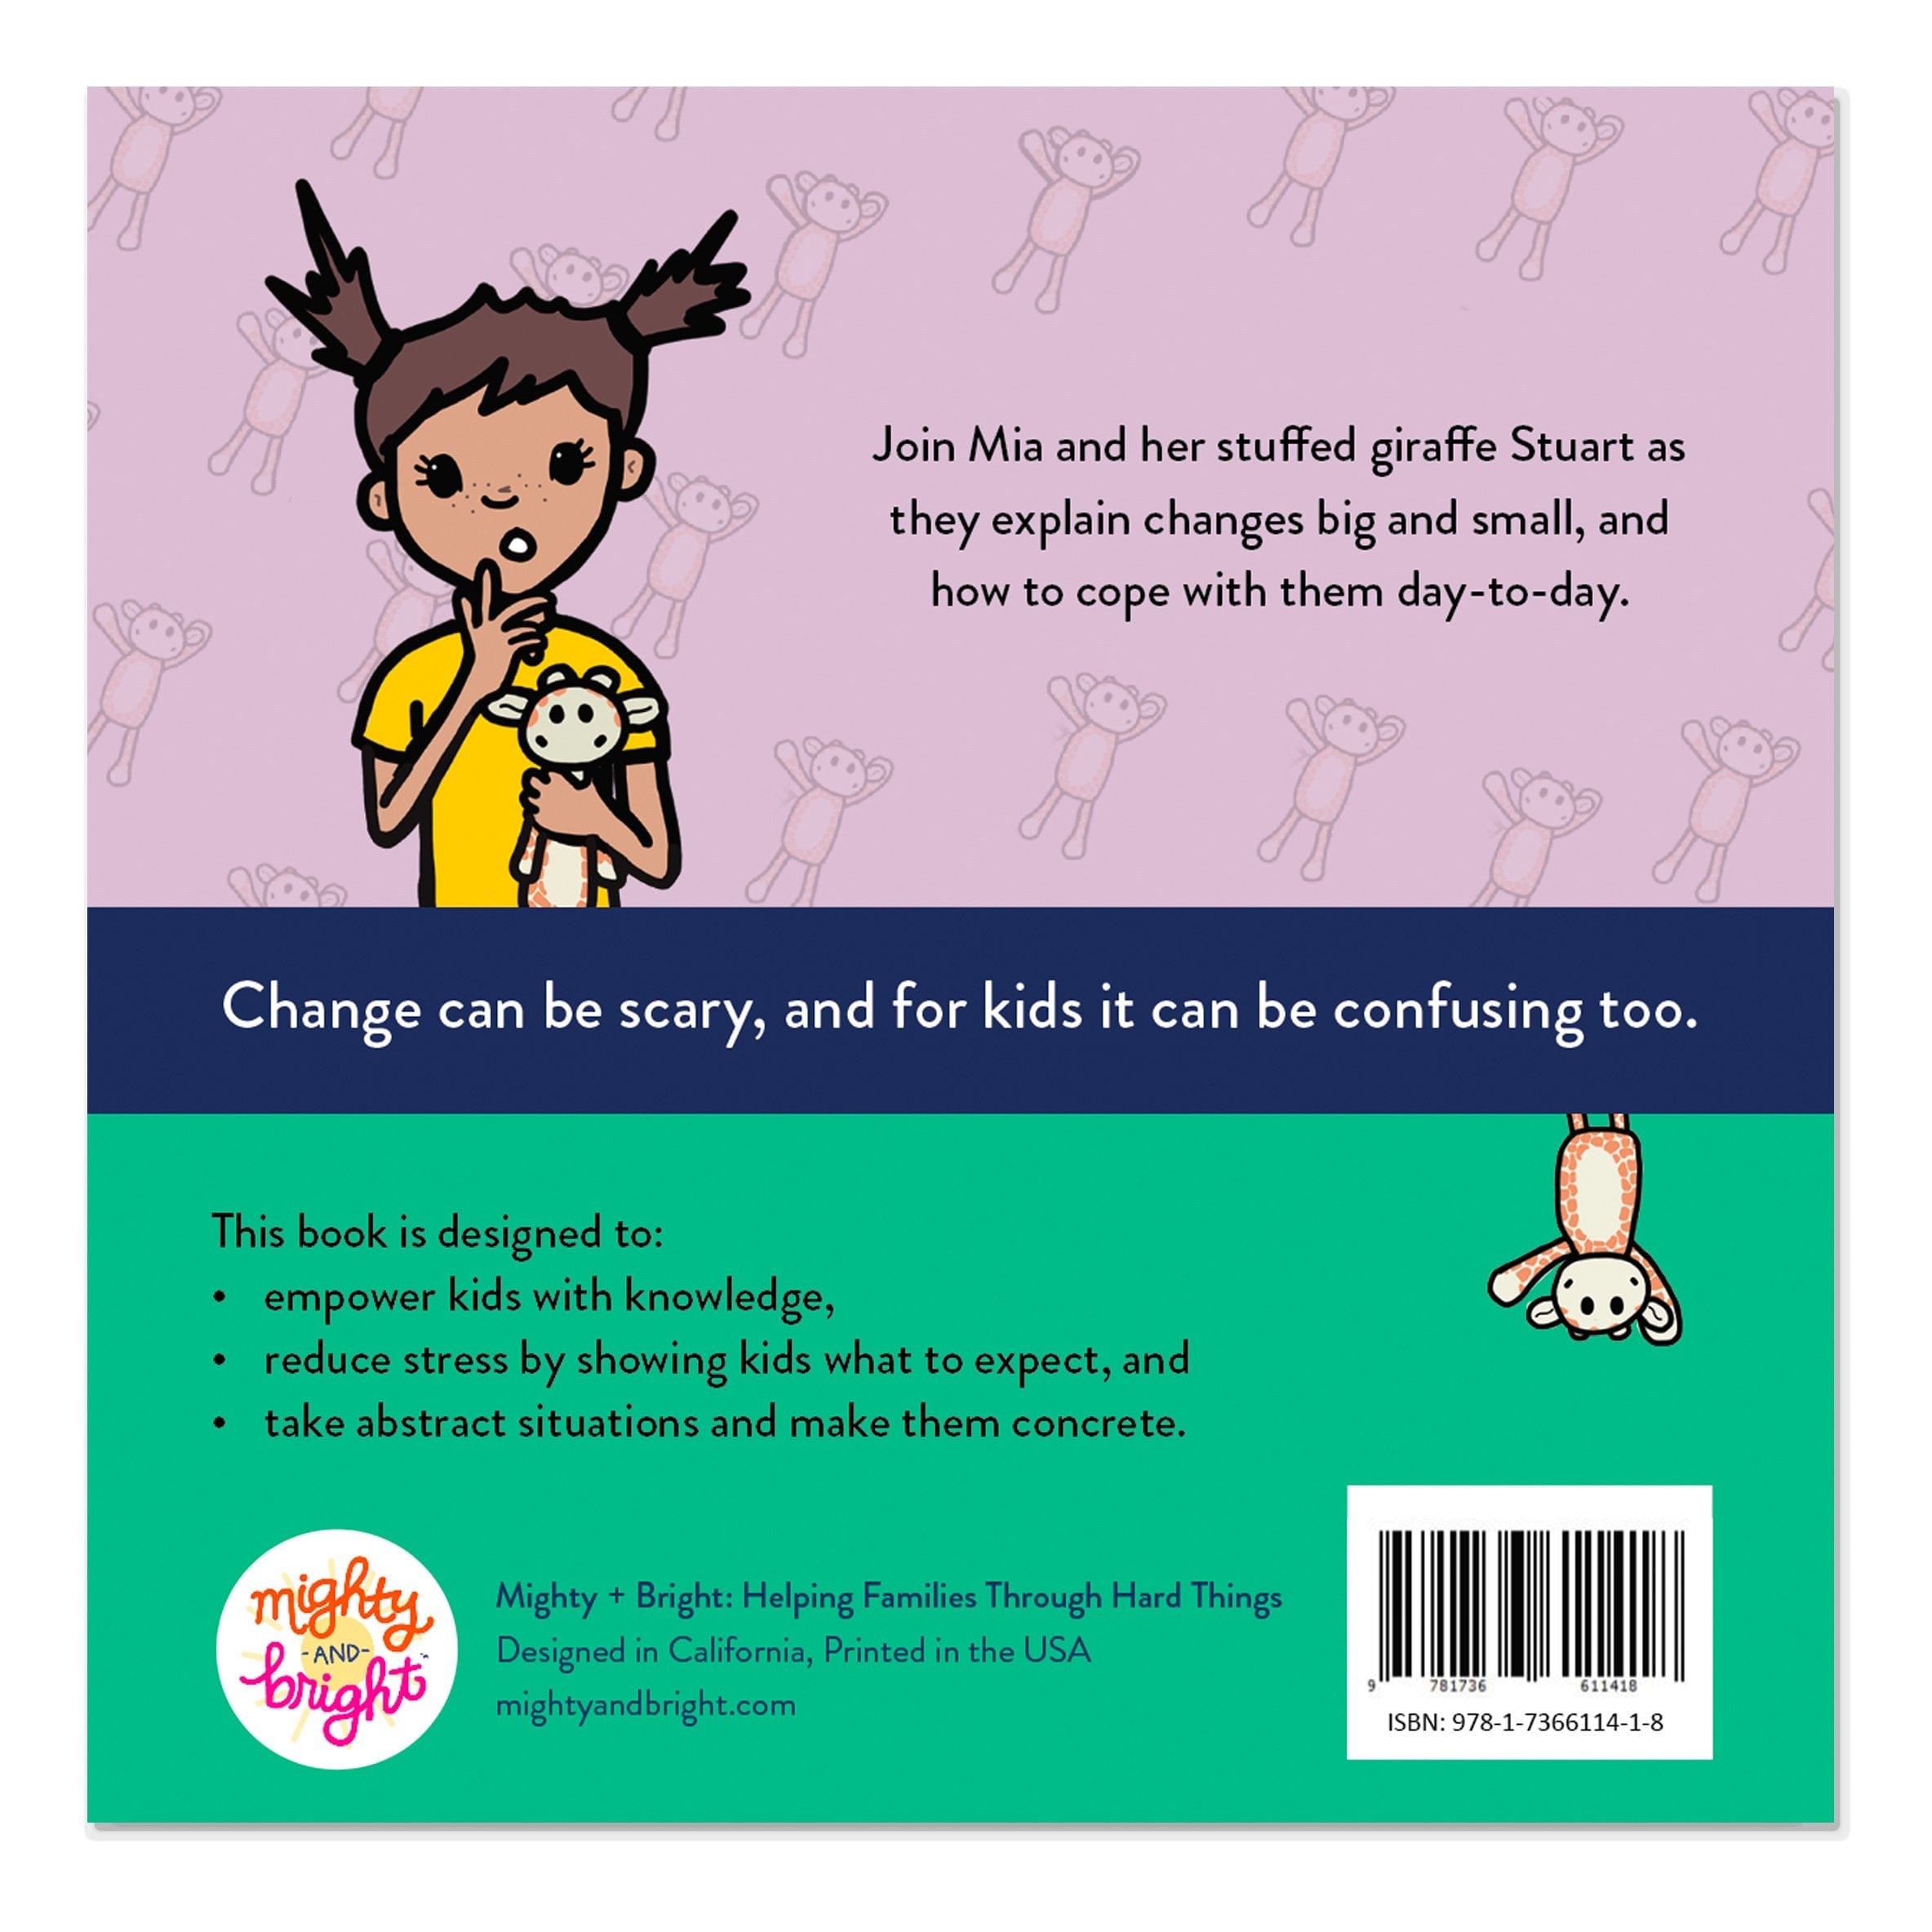 Inside of book, "Nothing Stays the Same, but That's Okay." Join Mia and her stuffed giraffe Stuart as they explain changes big and small, and how to cope with them day-to-day. Change can be scary, and for kids it can be confusing too. This book is designed to: empower kids with knowledge, reduce stress by showing kids what to expect, and take abstract situations and make them concrete.